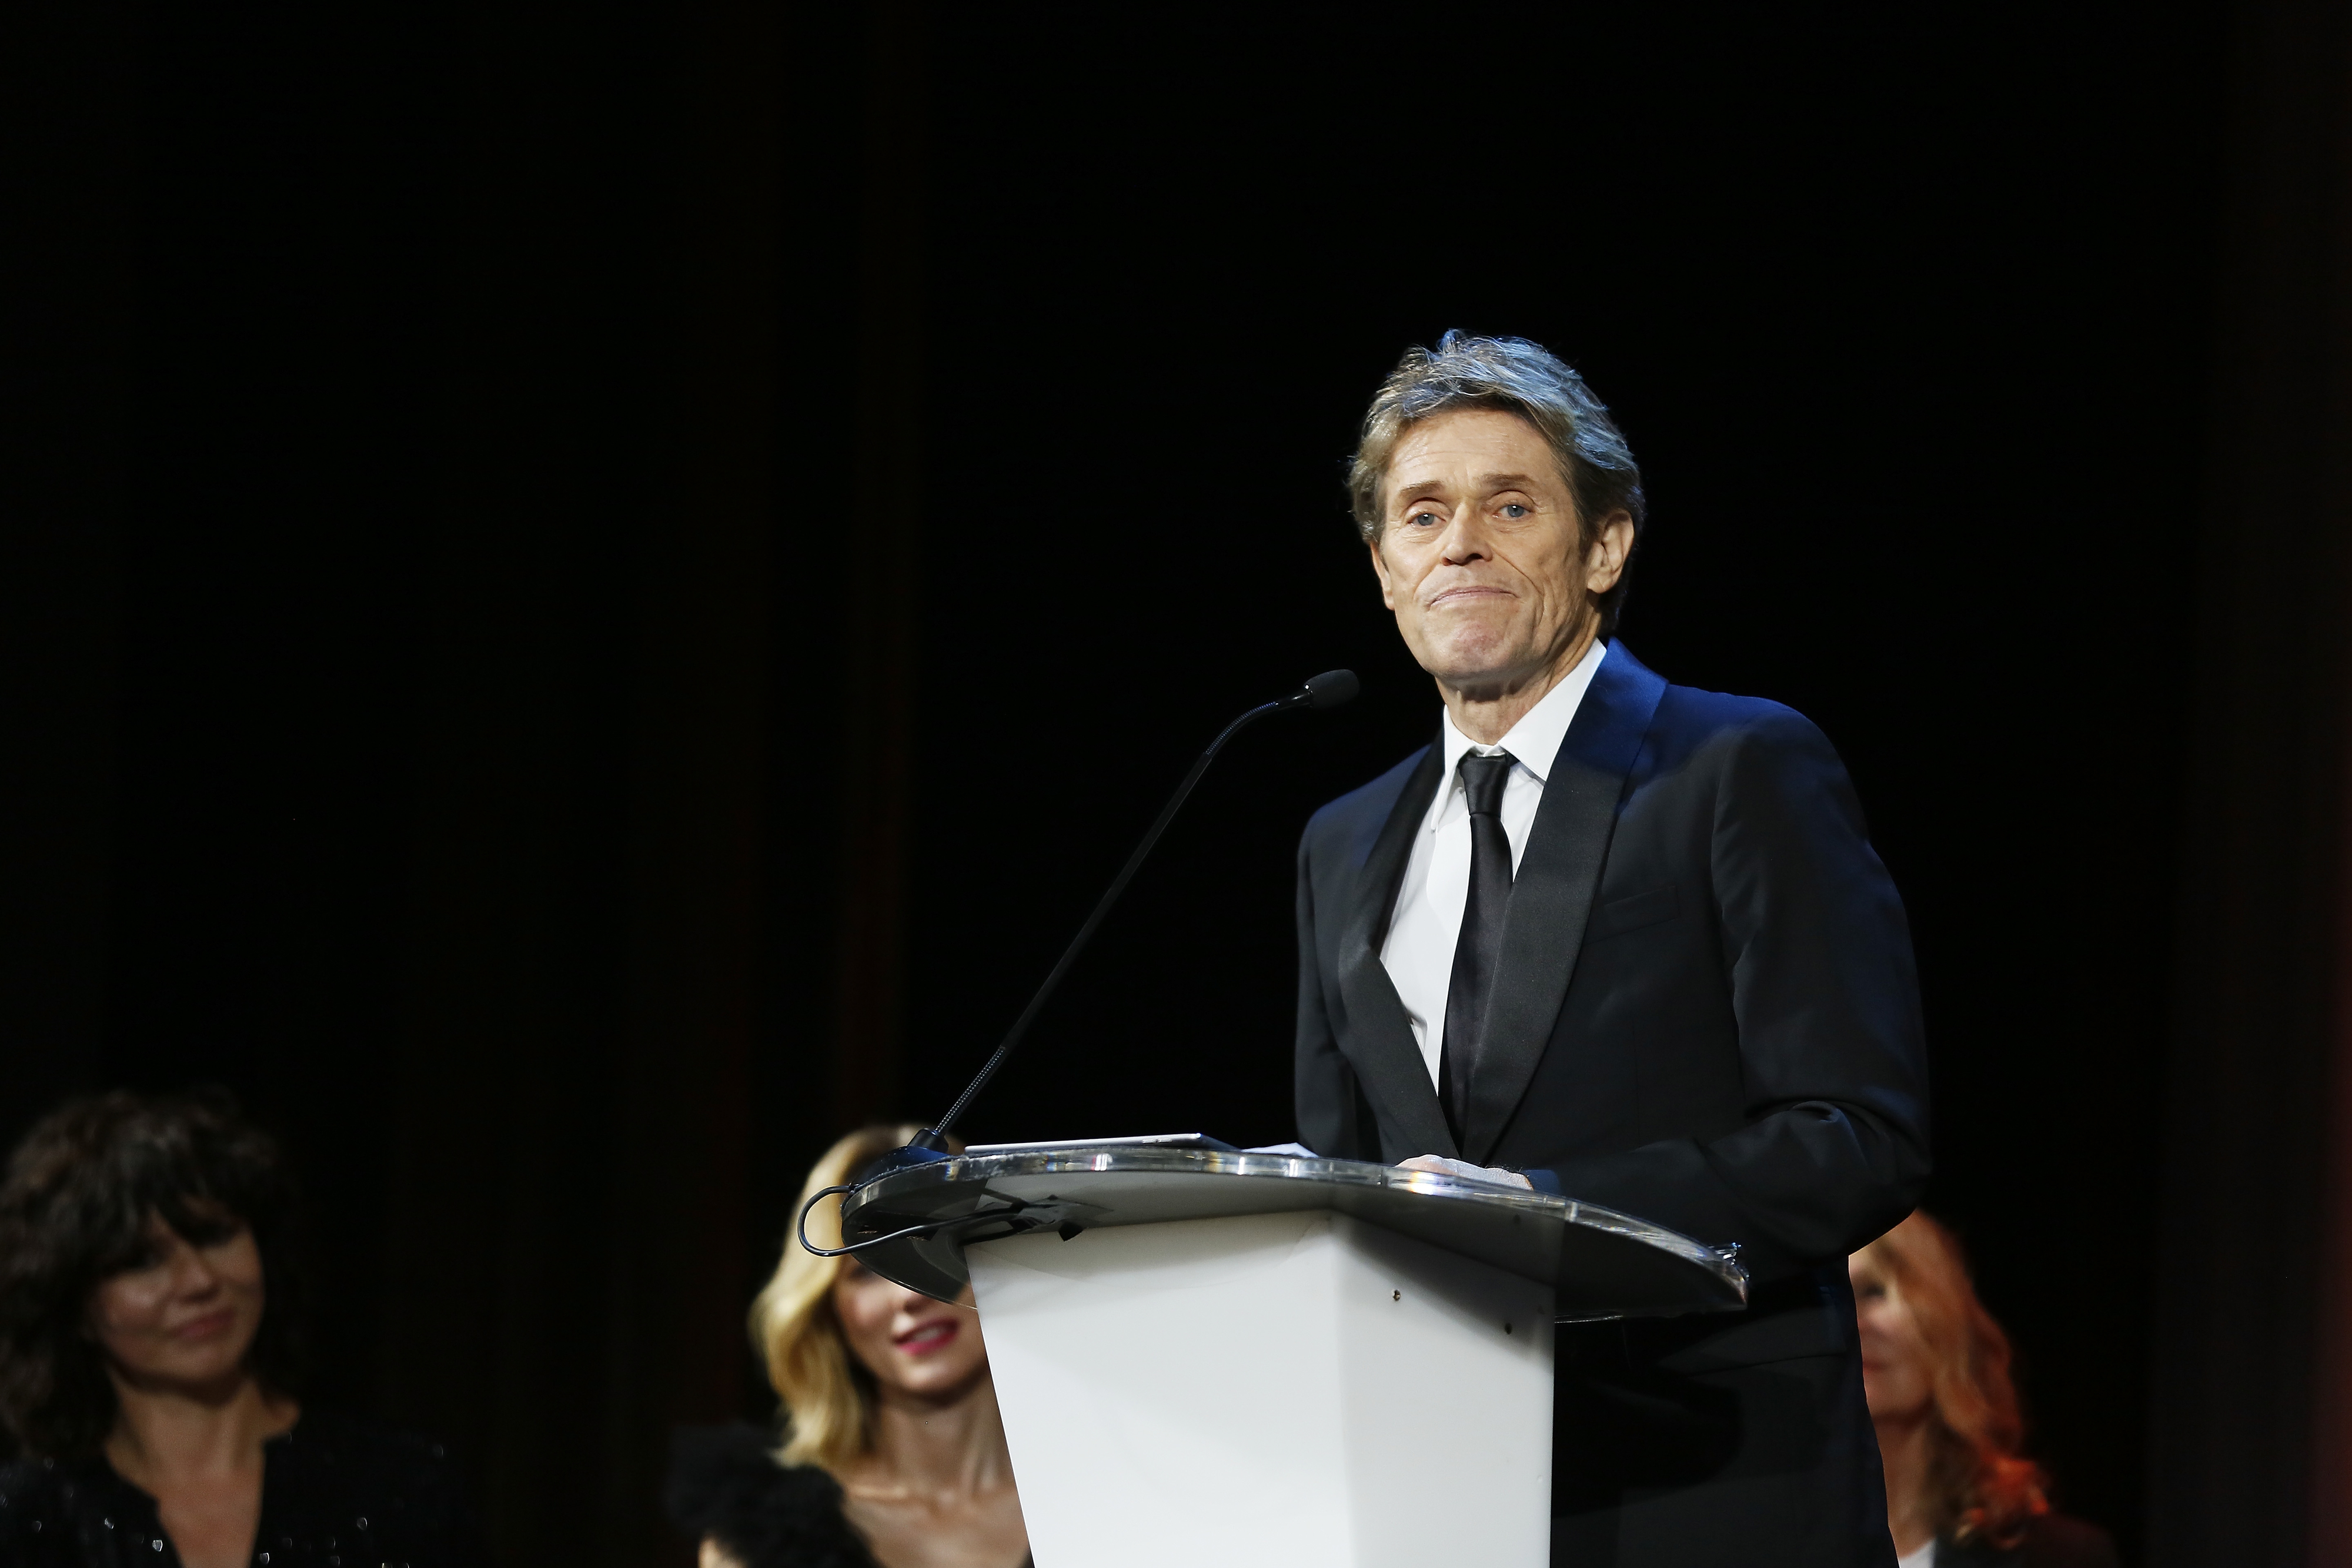 Willem Dafoe speaks at a podium, wearing a black suit with a white shirt and black tie. People listen in the background